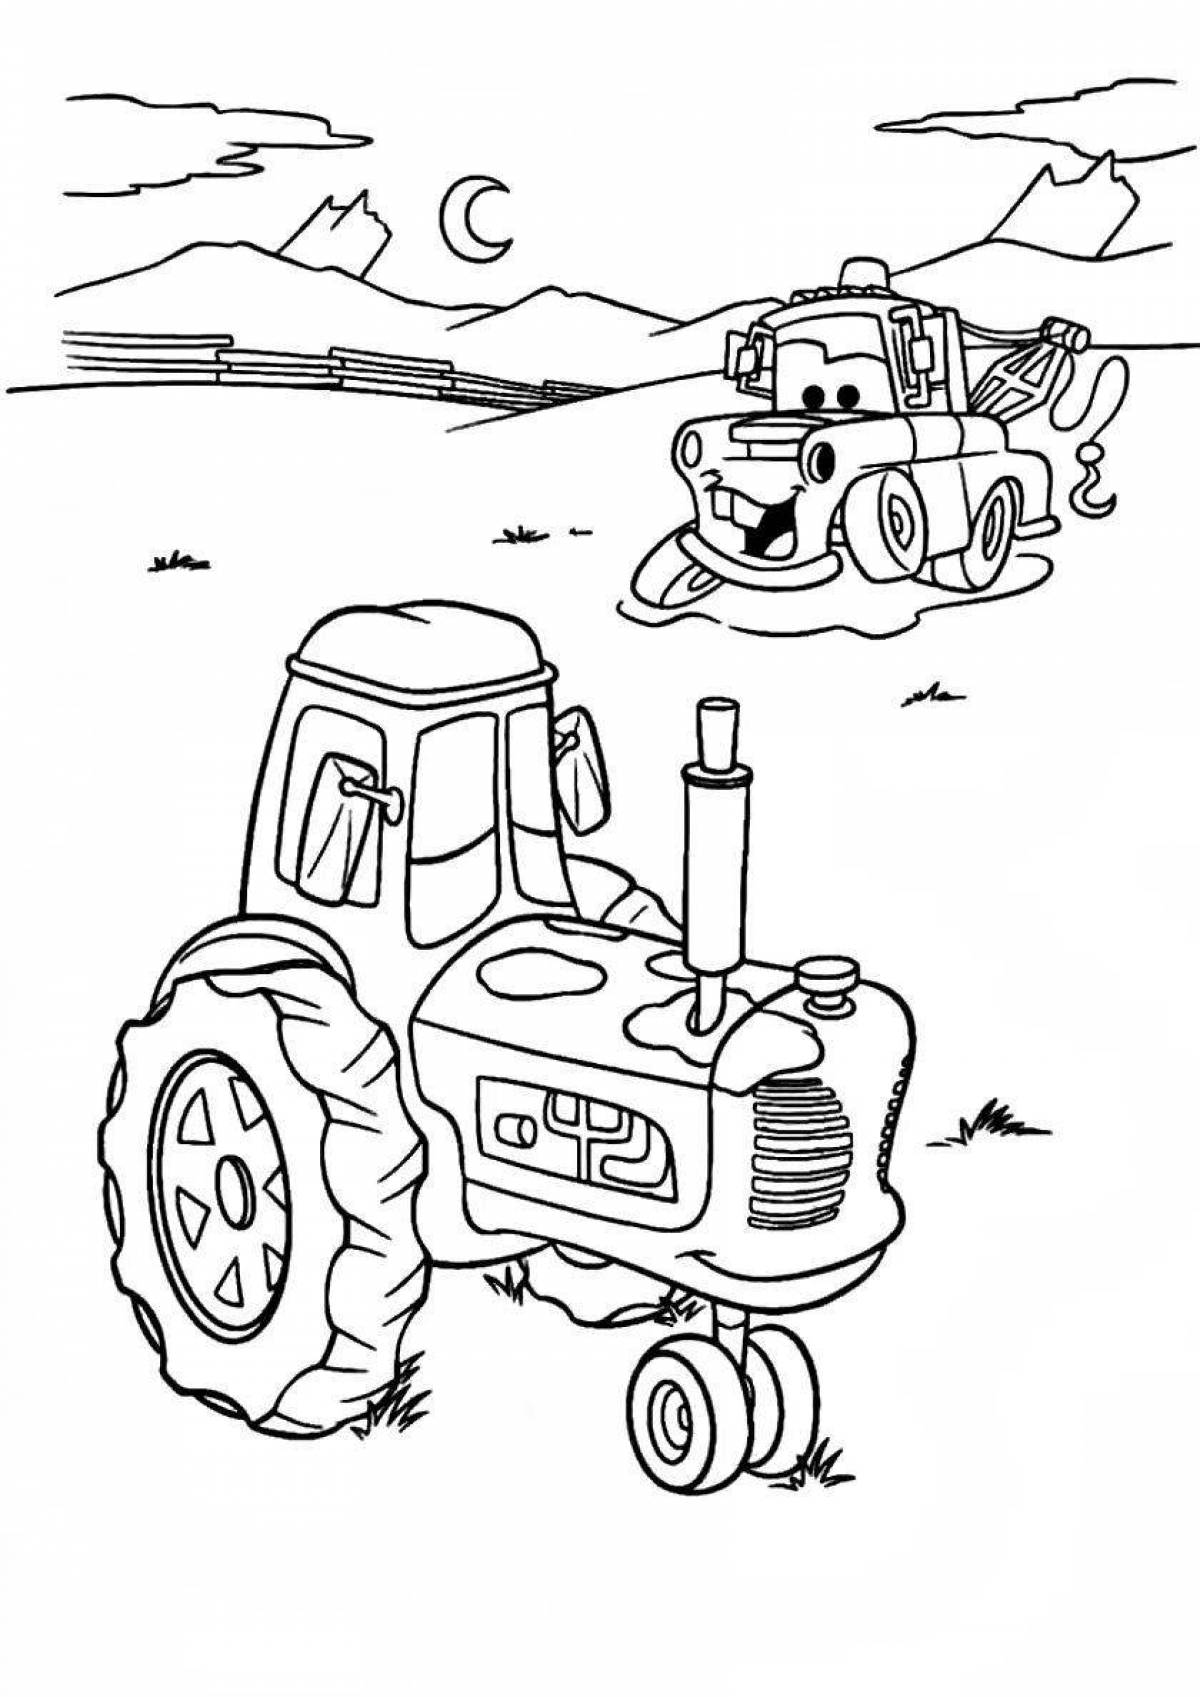 Intriguing coloring book frank cars